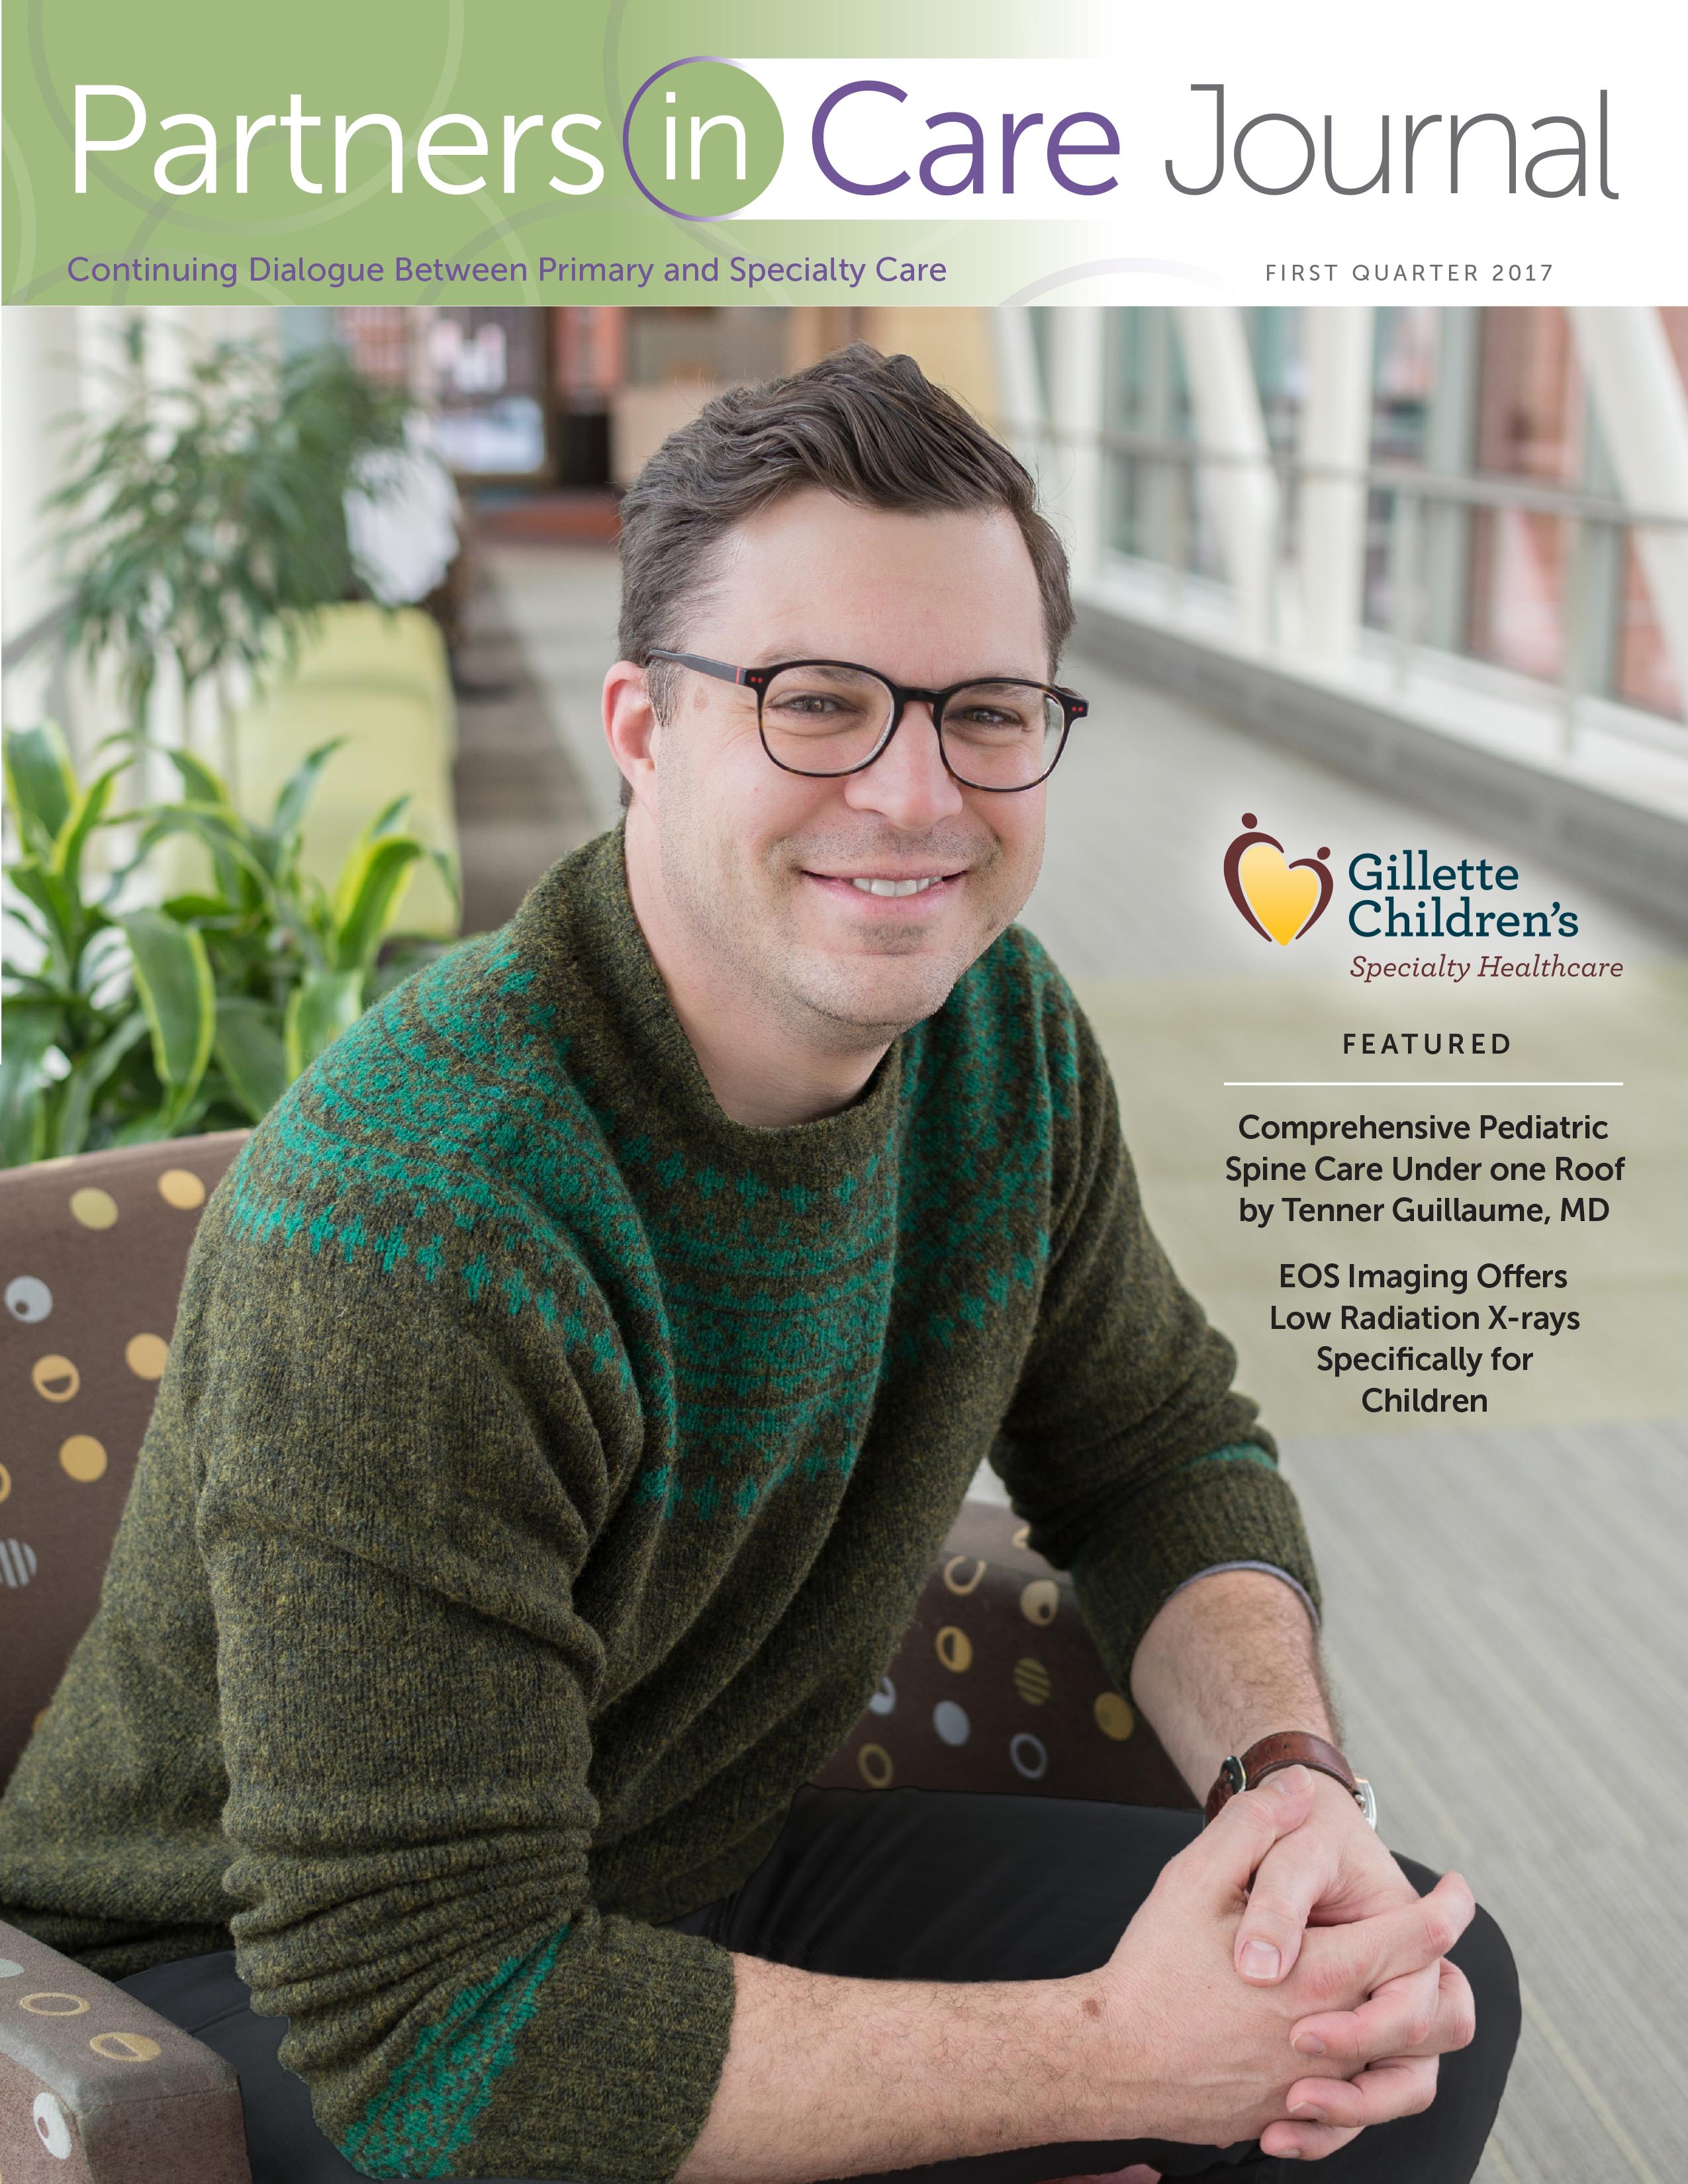 Partners in Care Journal – 1st Quarter Cover Photo 2017